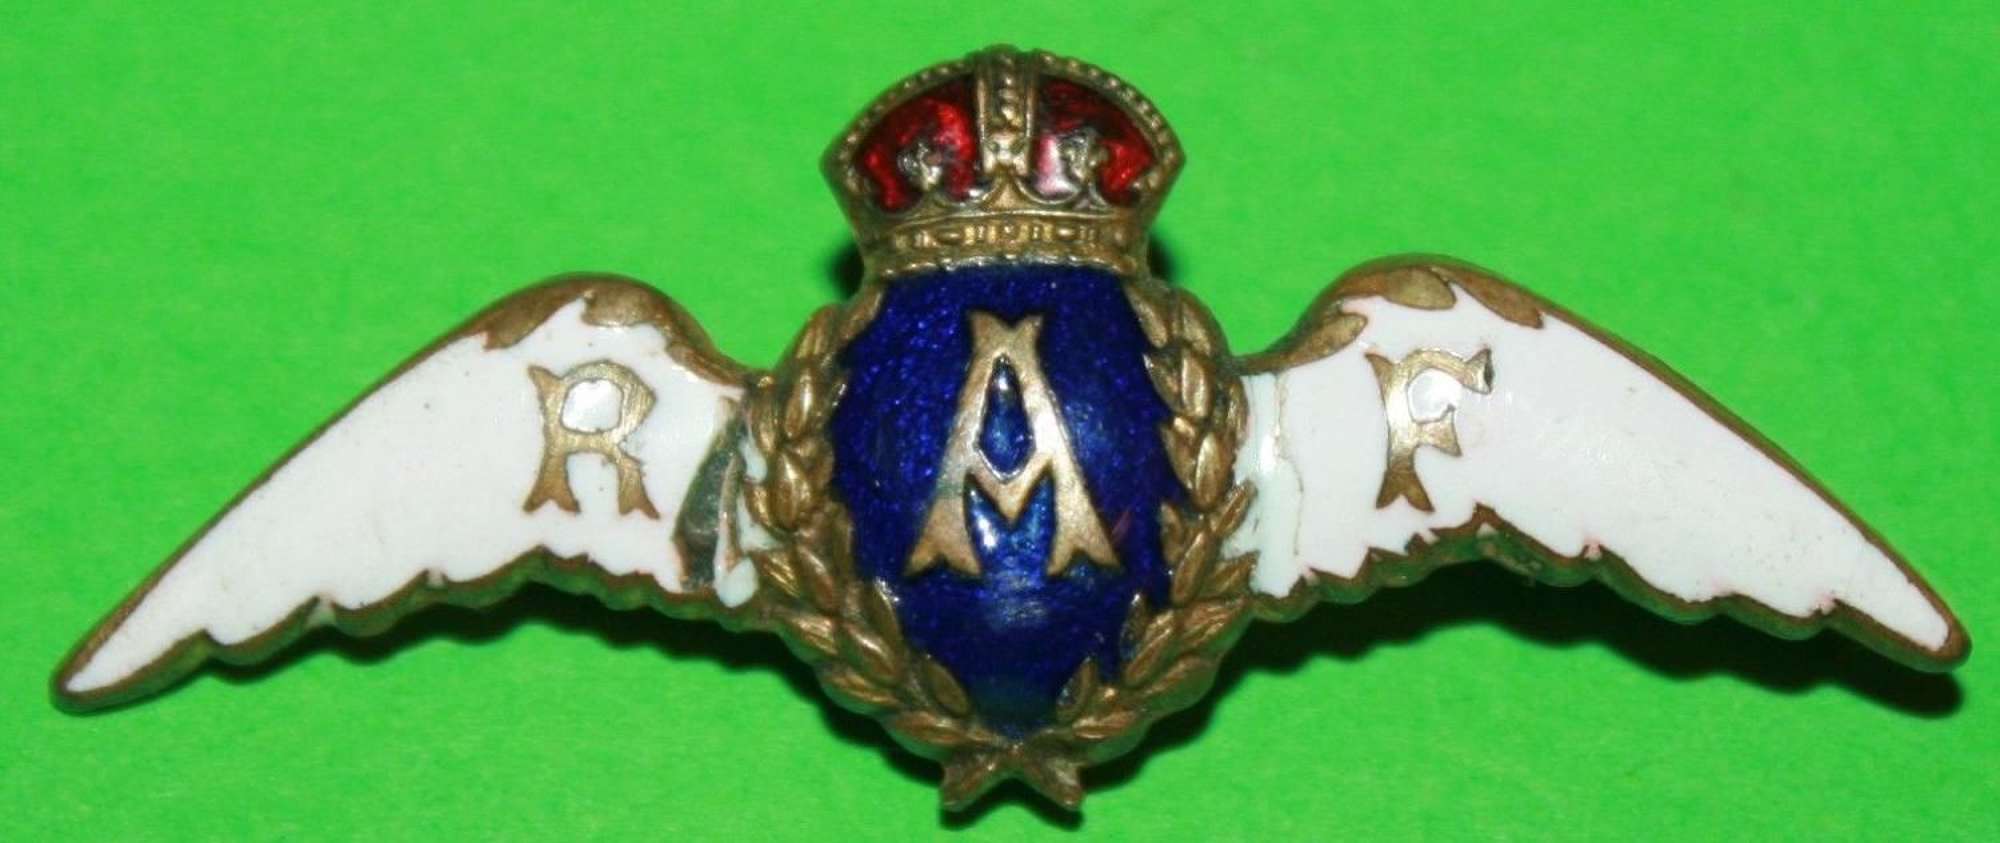 A RAF SWEETHEART BROOCH NICE EARLY STYLE WHITE AND BLUE